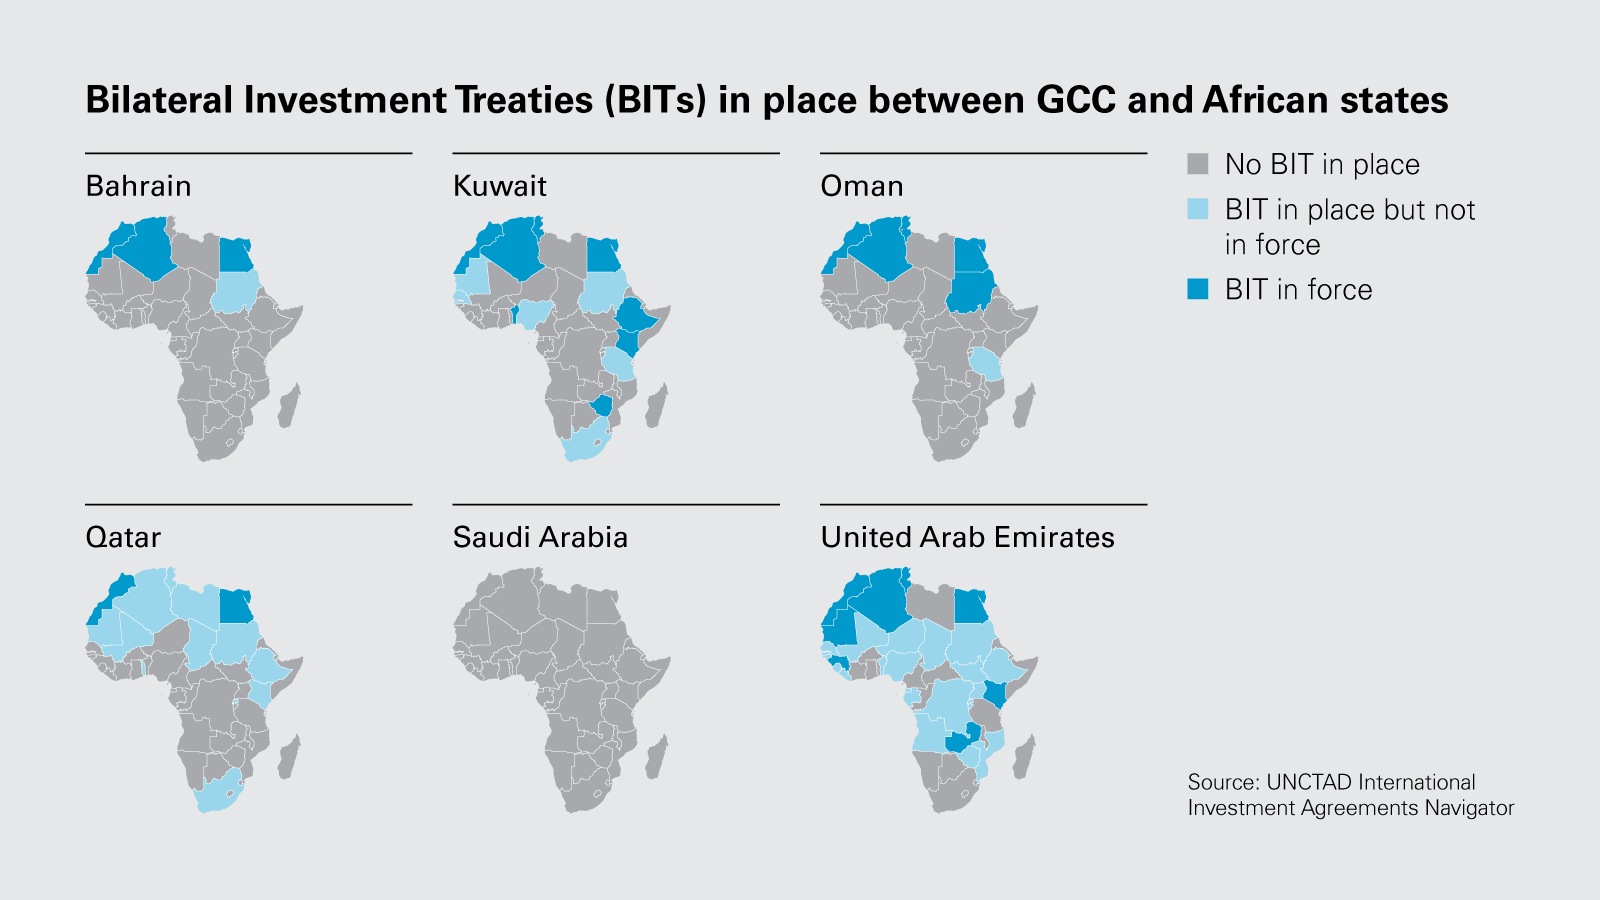 Bilateral Investment Treaties (BITs) in place between GCC and African states